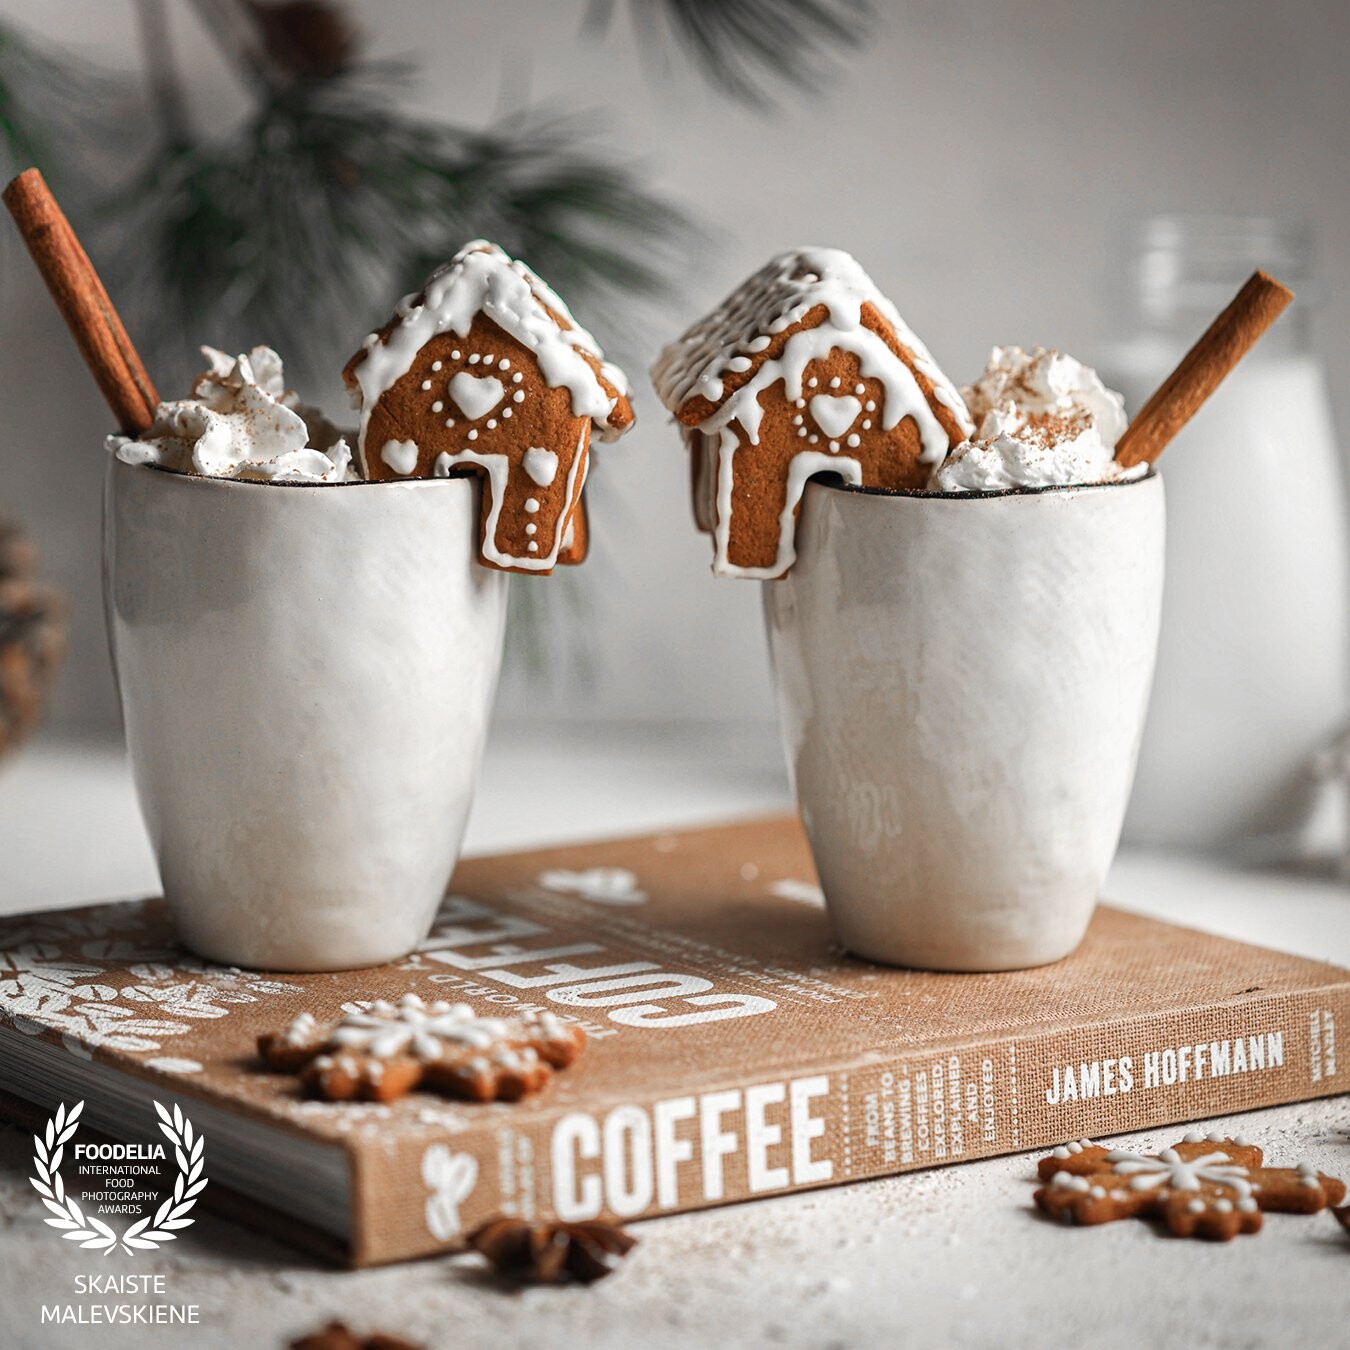 I am a very dark and moody style food photography lover, but with these little gingerbread houses I wanted to create a light and airy feeling.